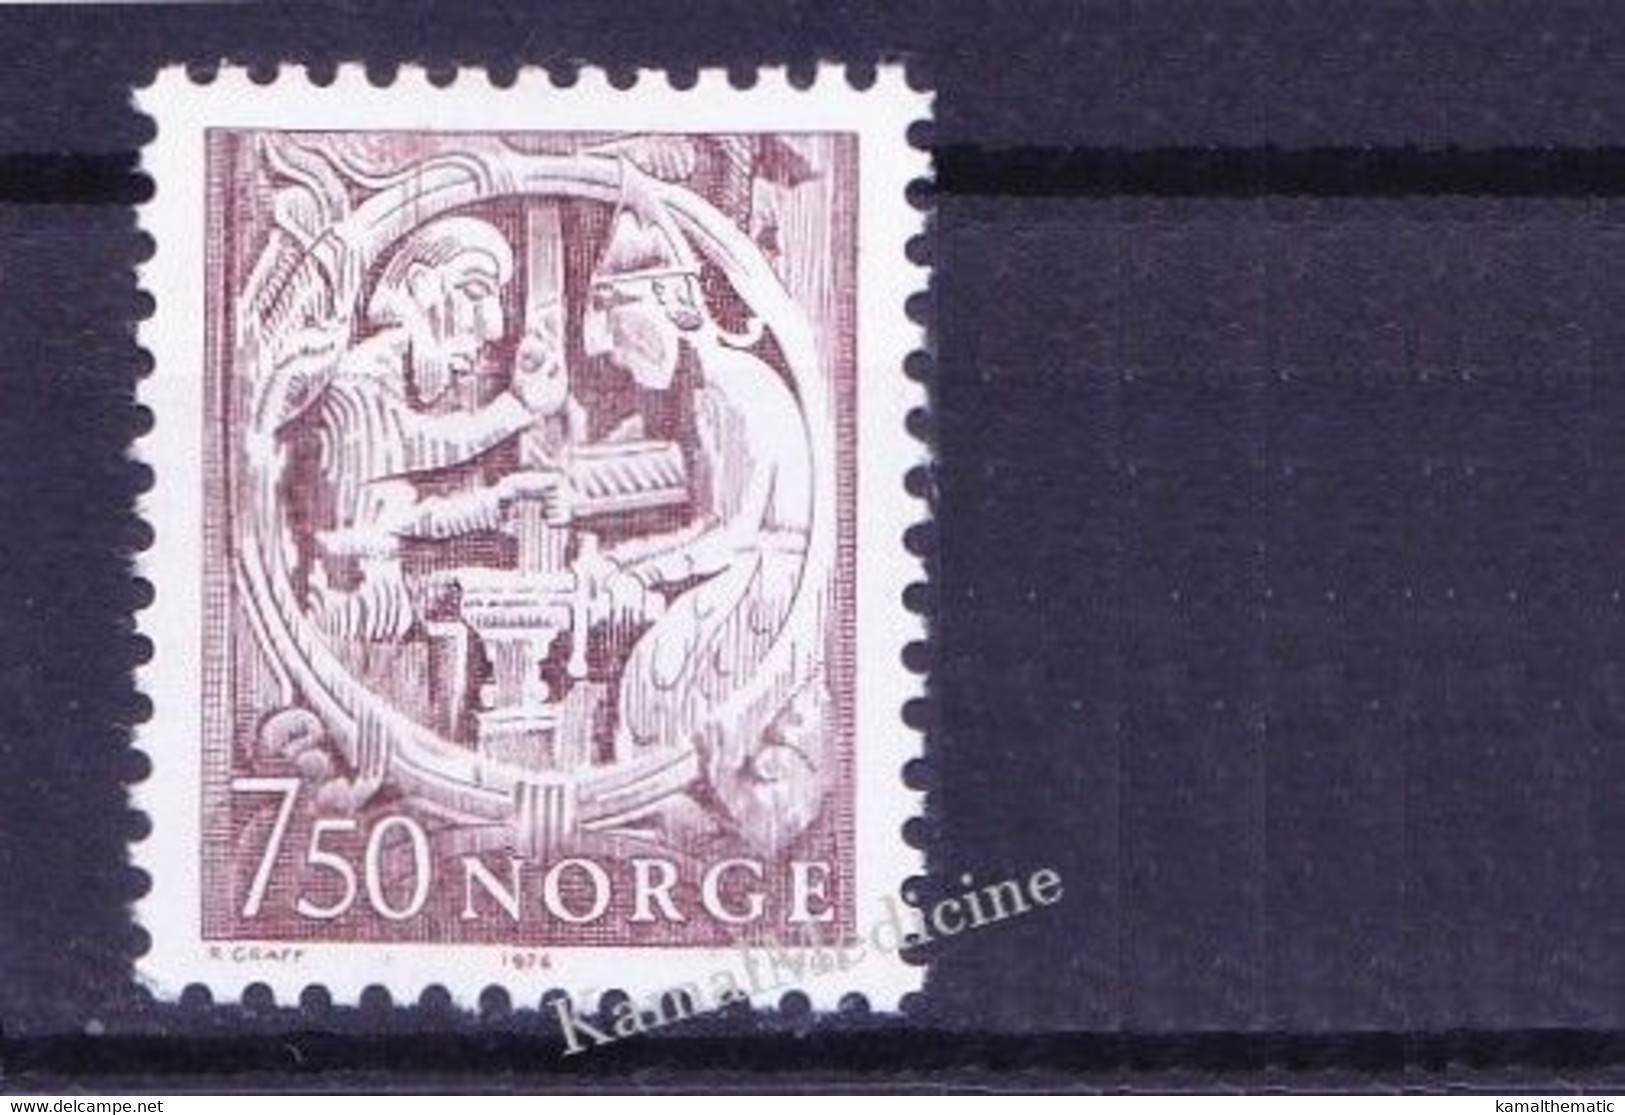 Norway 1976 MNH 1v, Woodcarving At Hylestad Church, Art - Gravures